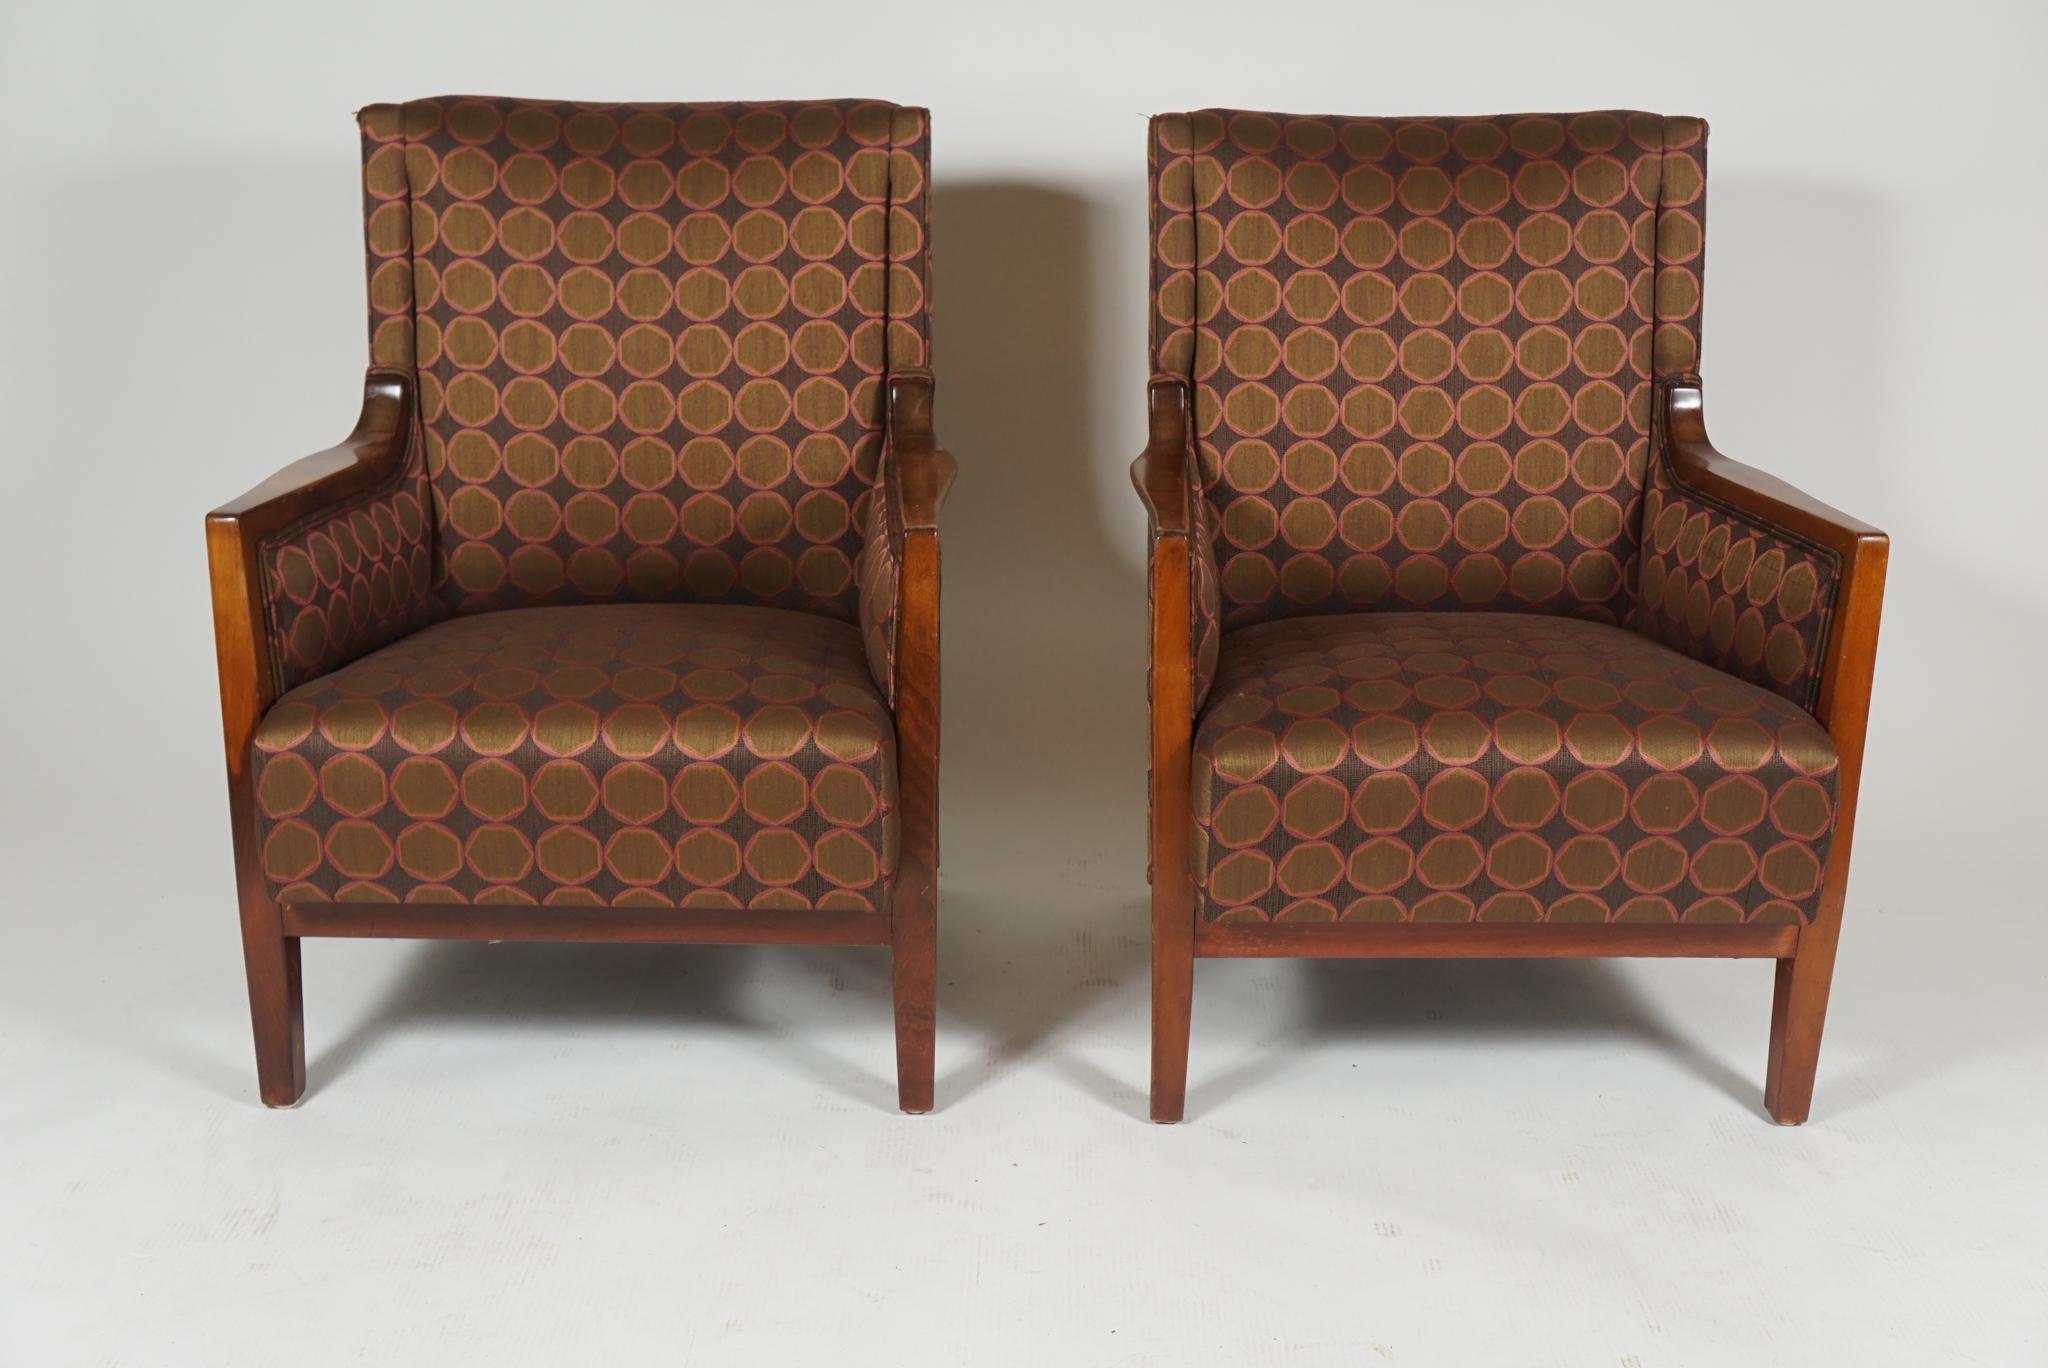 Pair of elegant Bergeres of Danish origin, the mahogany frames newly upholstered in a geometric patterned fabric. Art Deco period, 1920s-1930s.